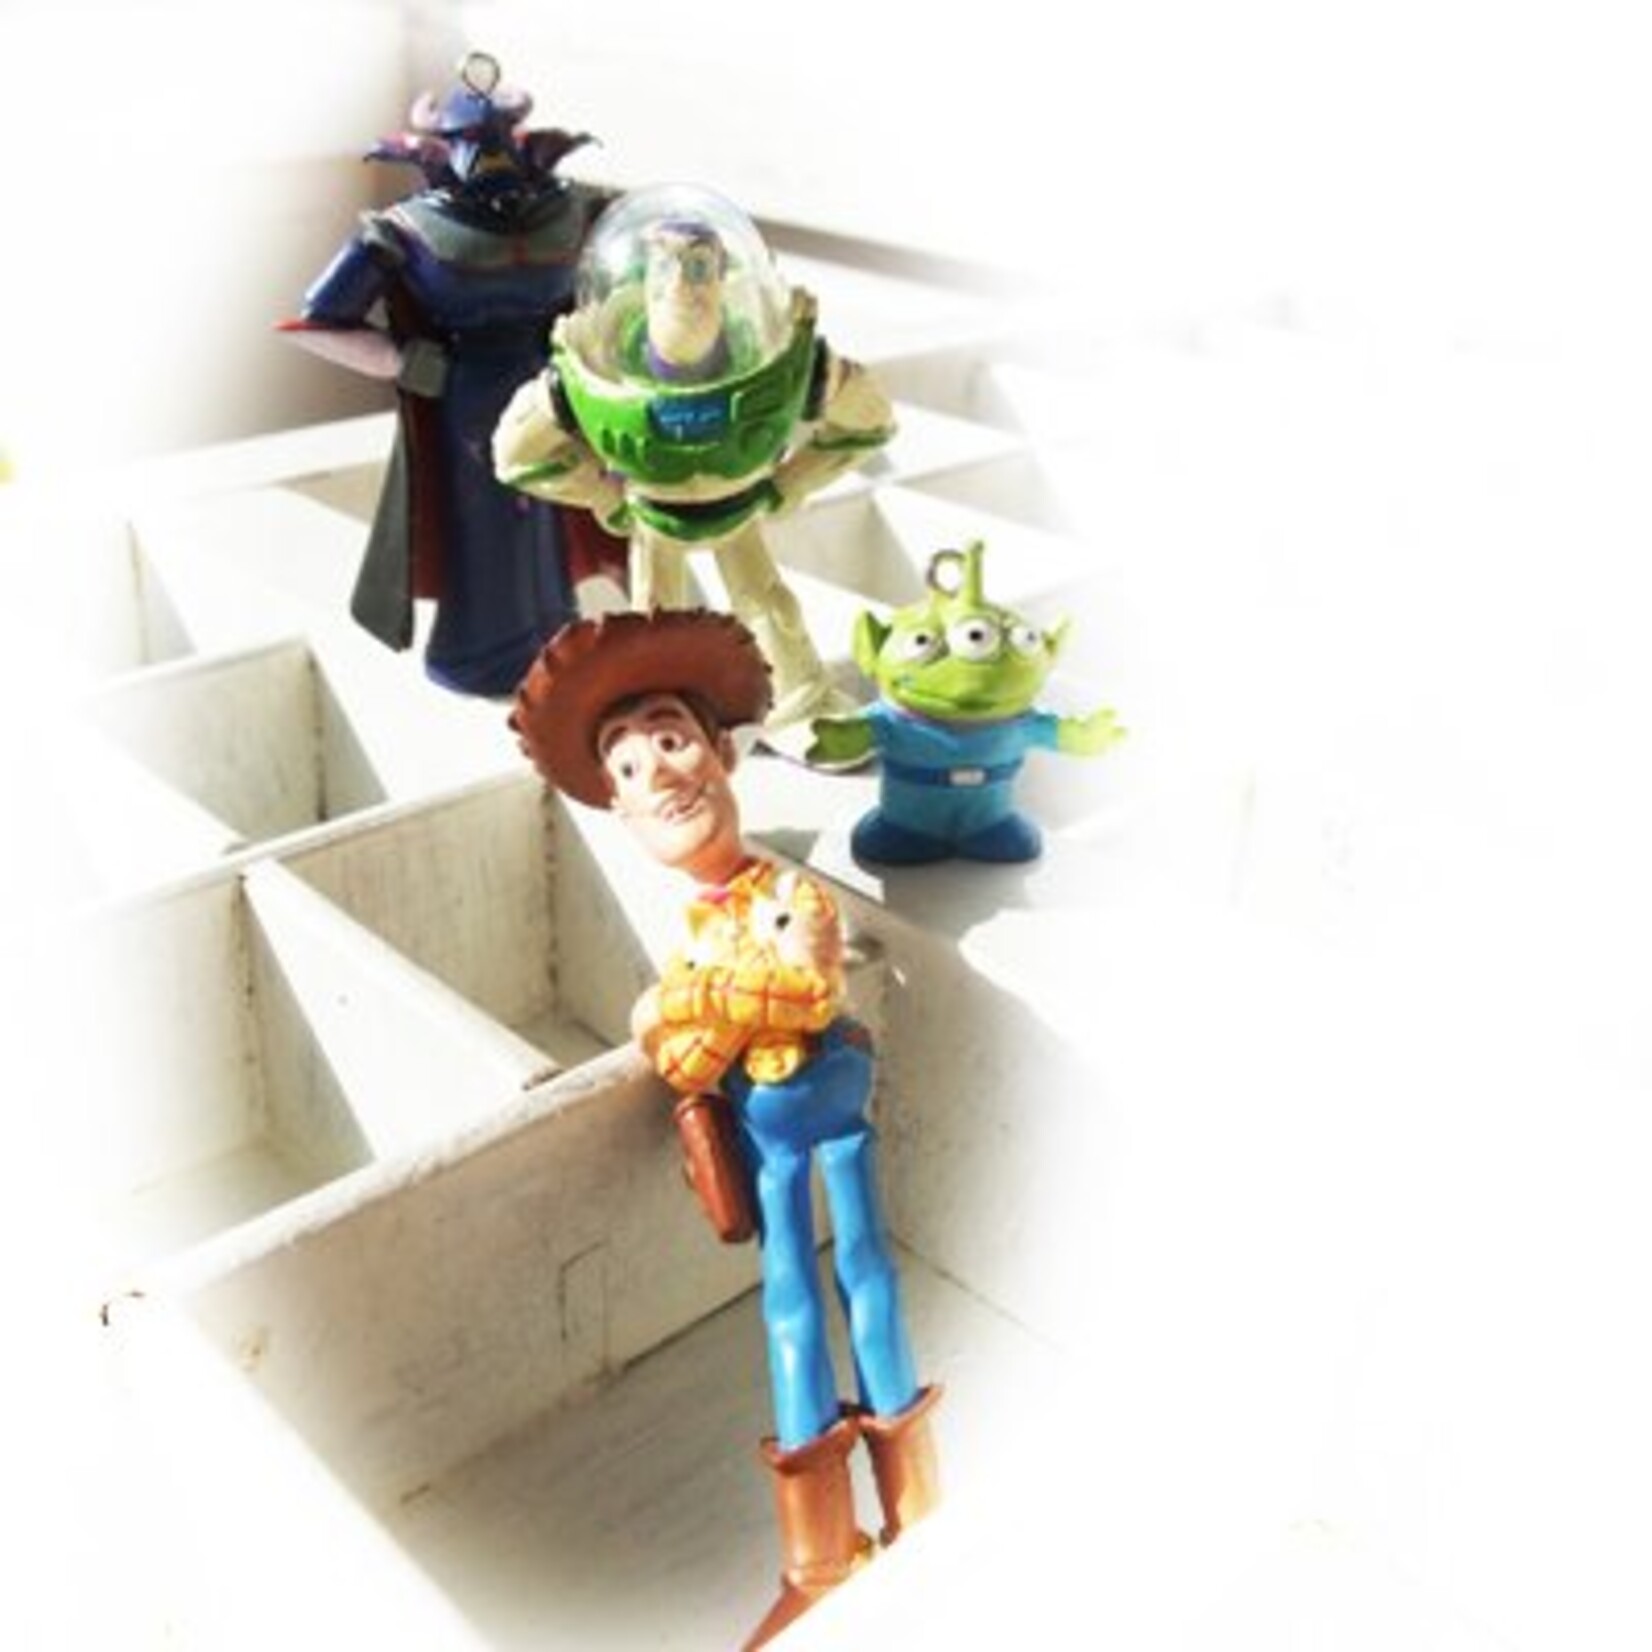 Toy story bedels (1x)